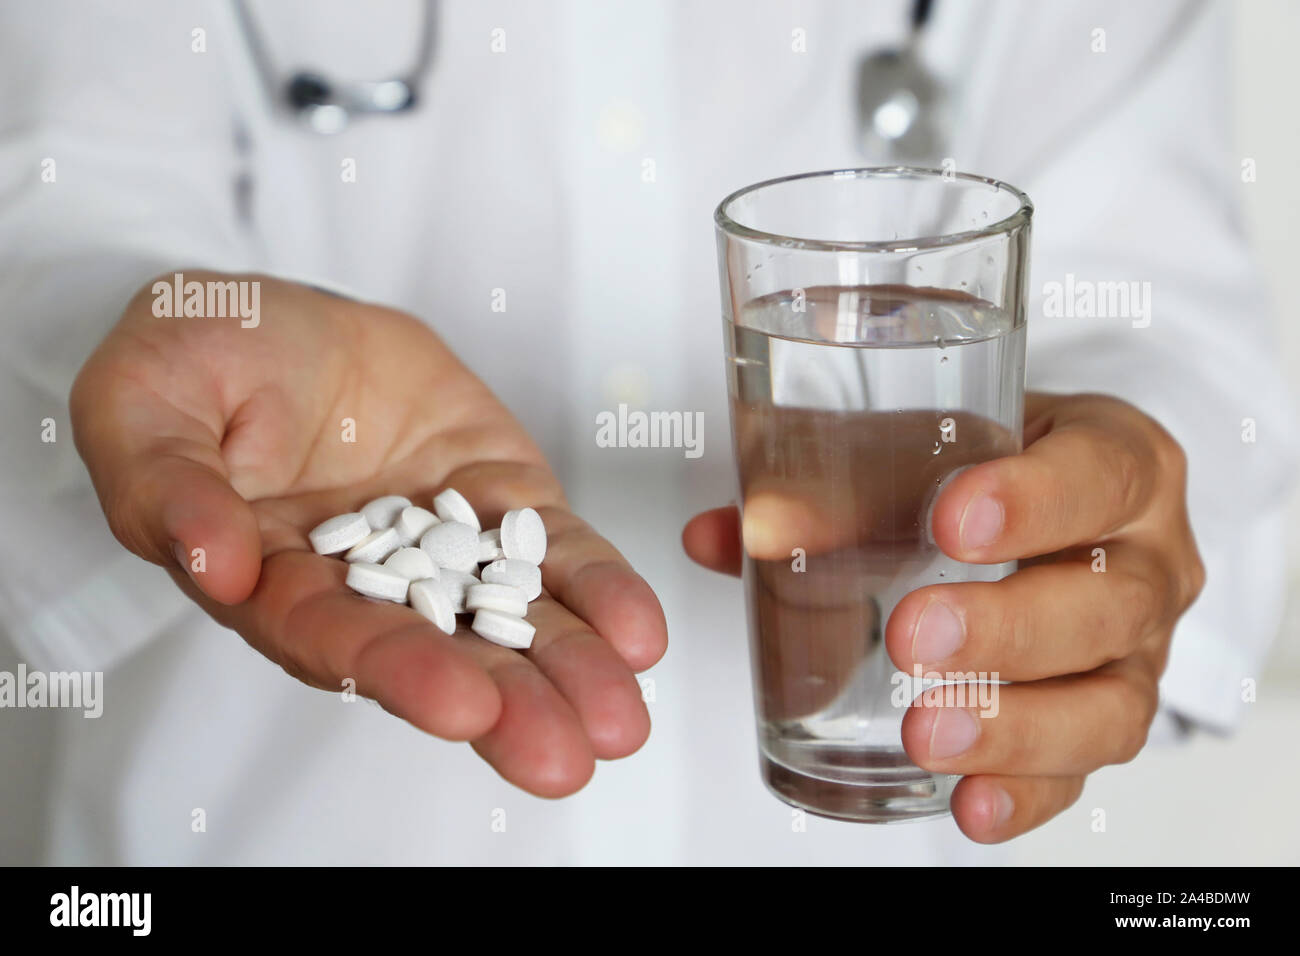 Pills and glass of water in hands of doctor, physician giving medication in white tablets. Concept of dose of drugs, medical exam, pharmacist Stock Photo